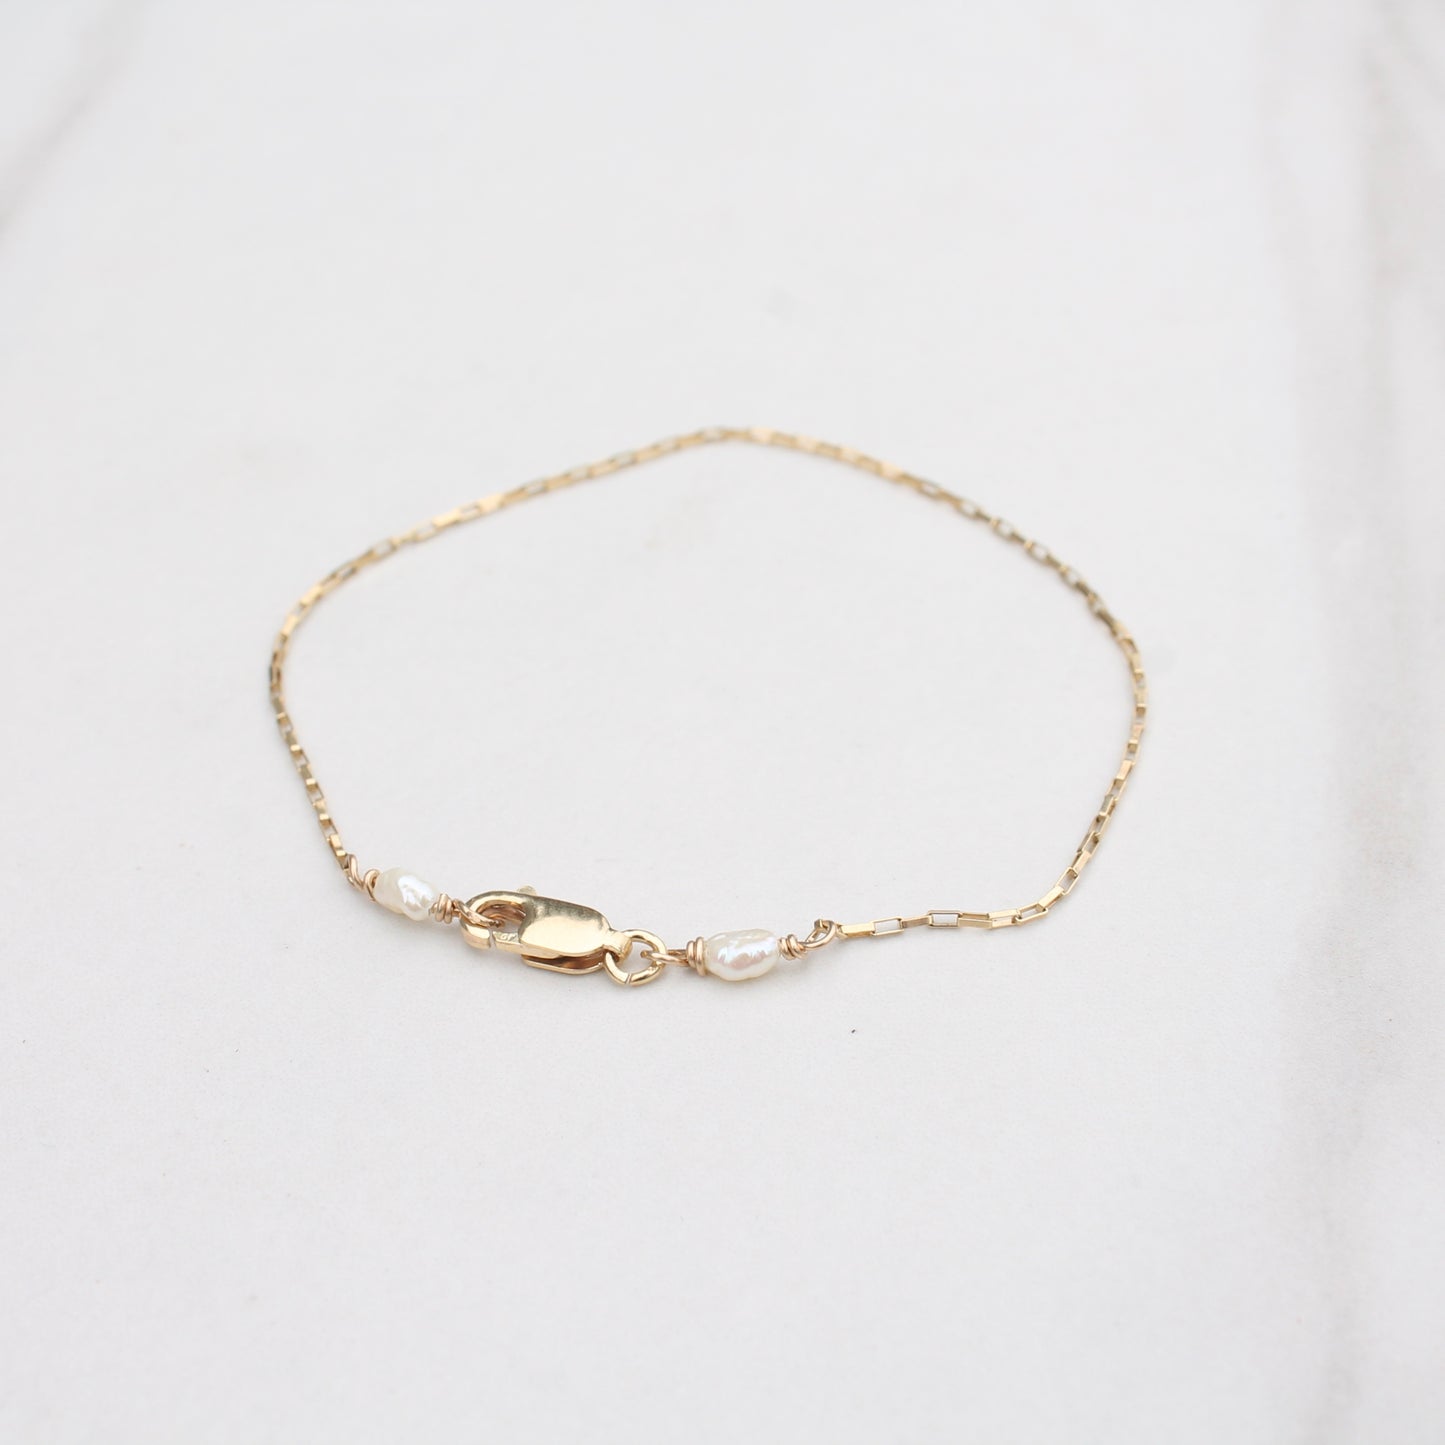 Gold Filled Drawn Cable Chain Bracelet with Rice Pearls